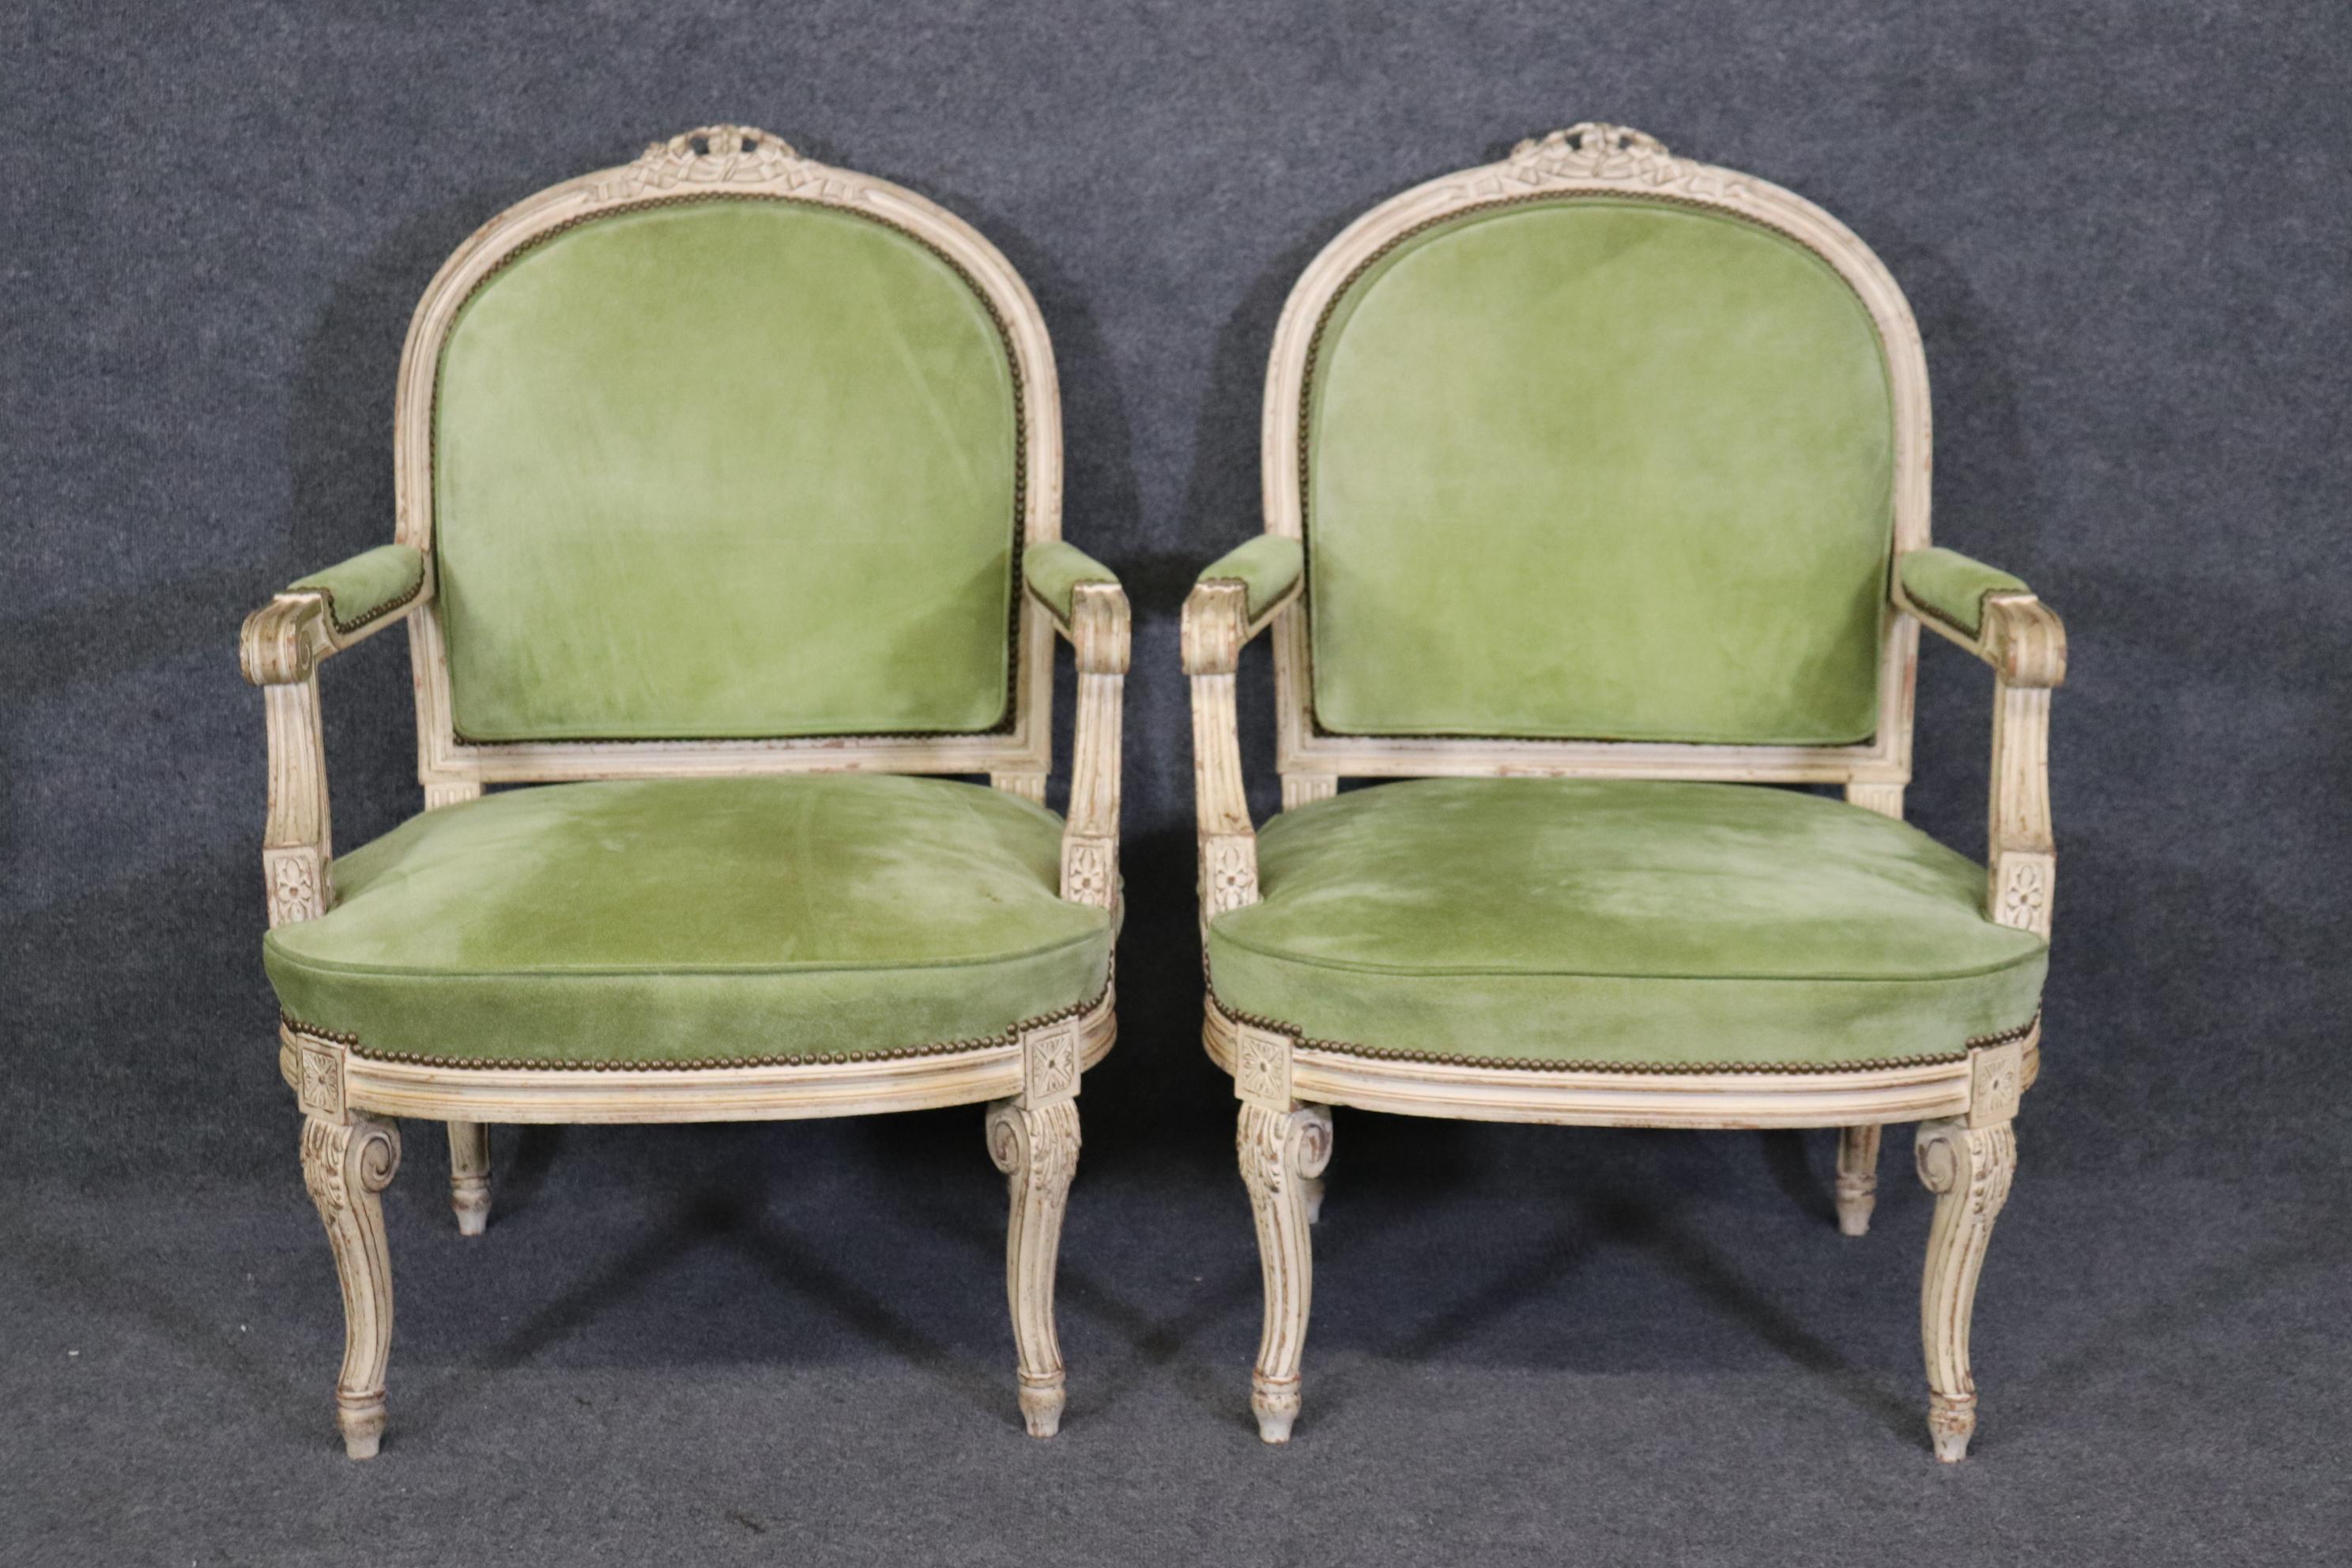 This is s a superb set of 2 ( we have an identical pair listed separately if interested) and they are upholstered in suede and in good condition with minor stains and signs of age as to be expected. The chairs date to teh 1940s and measure 38.75